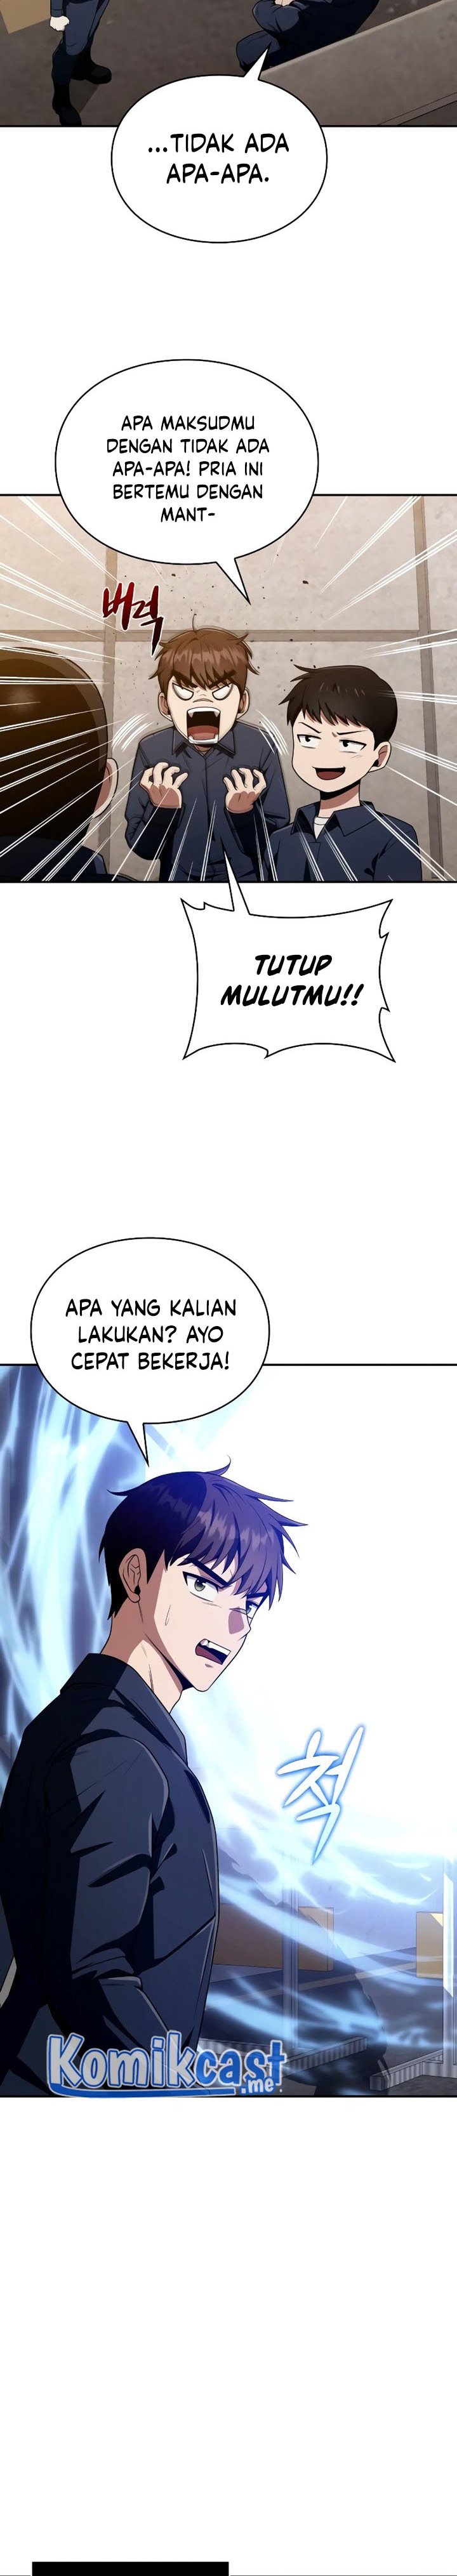 Dilarang COPAS - situs resmi www.mangacanblog.com - Komik clever cleaning life of the returned genius hunter 005 - chapter 5 6 Indonesia clever cleaning life of the returned genius hunter 005 - chapter 5 Terbaru 28|Baca Manga Komik Indonesia|Mangacan